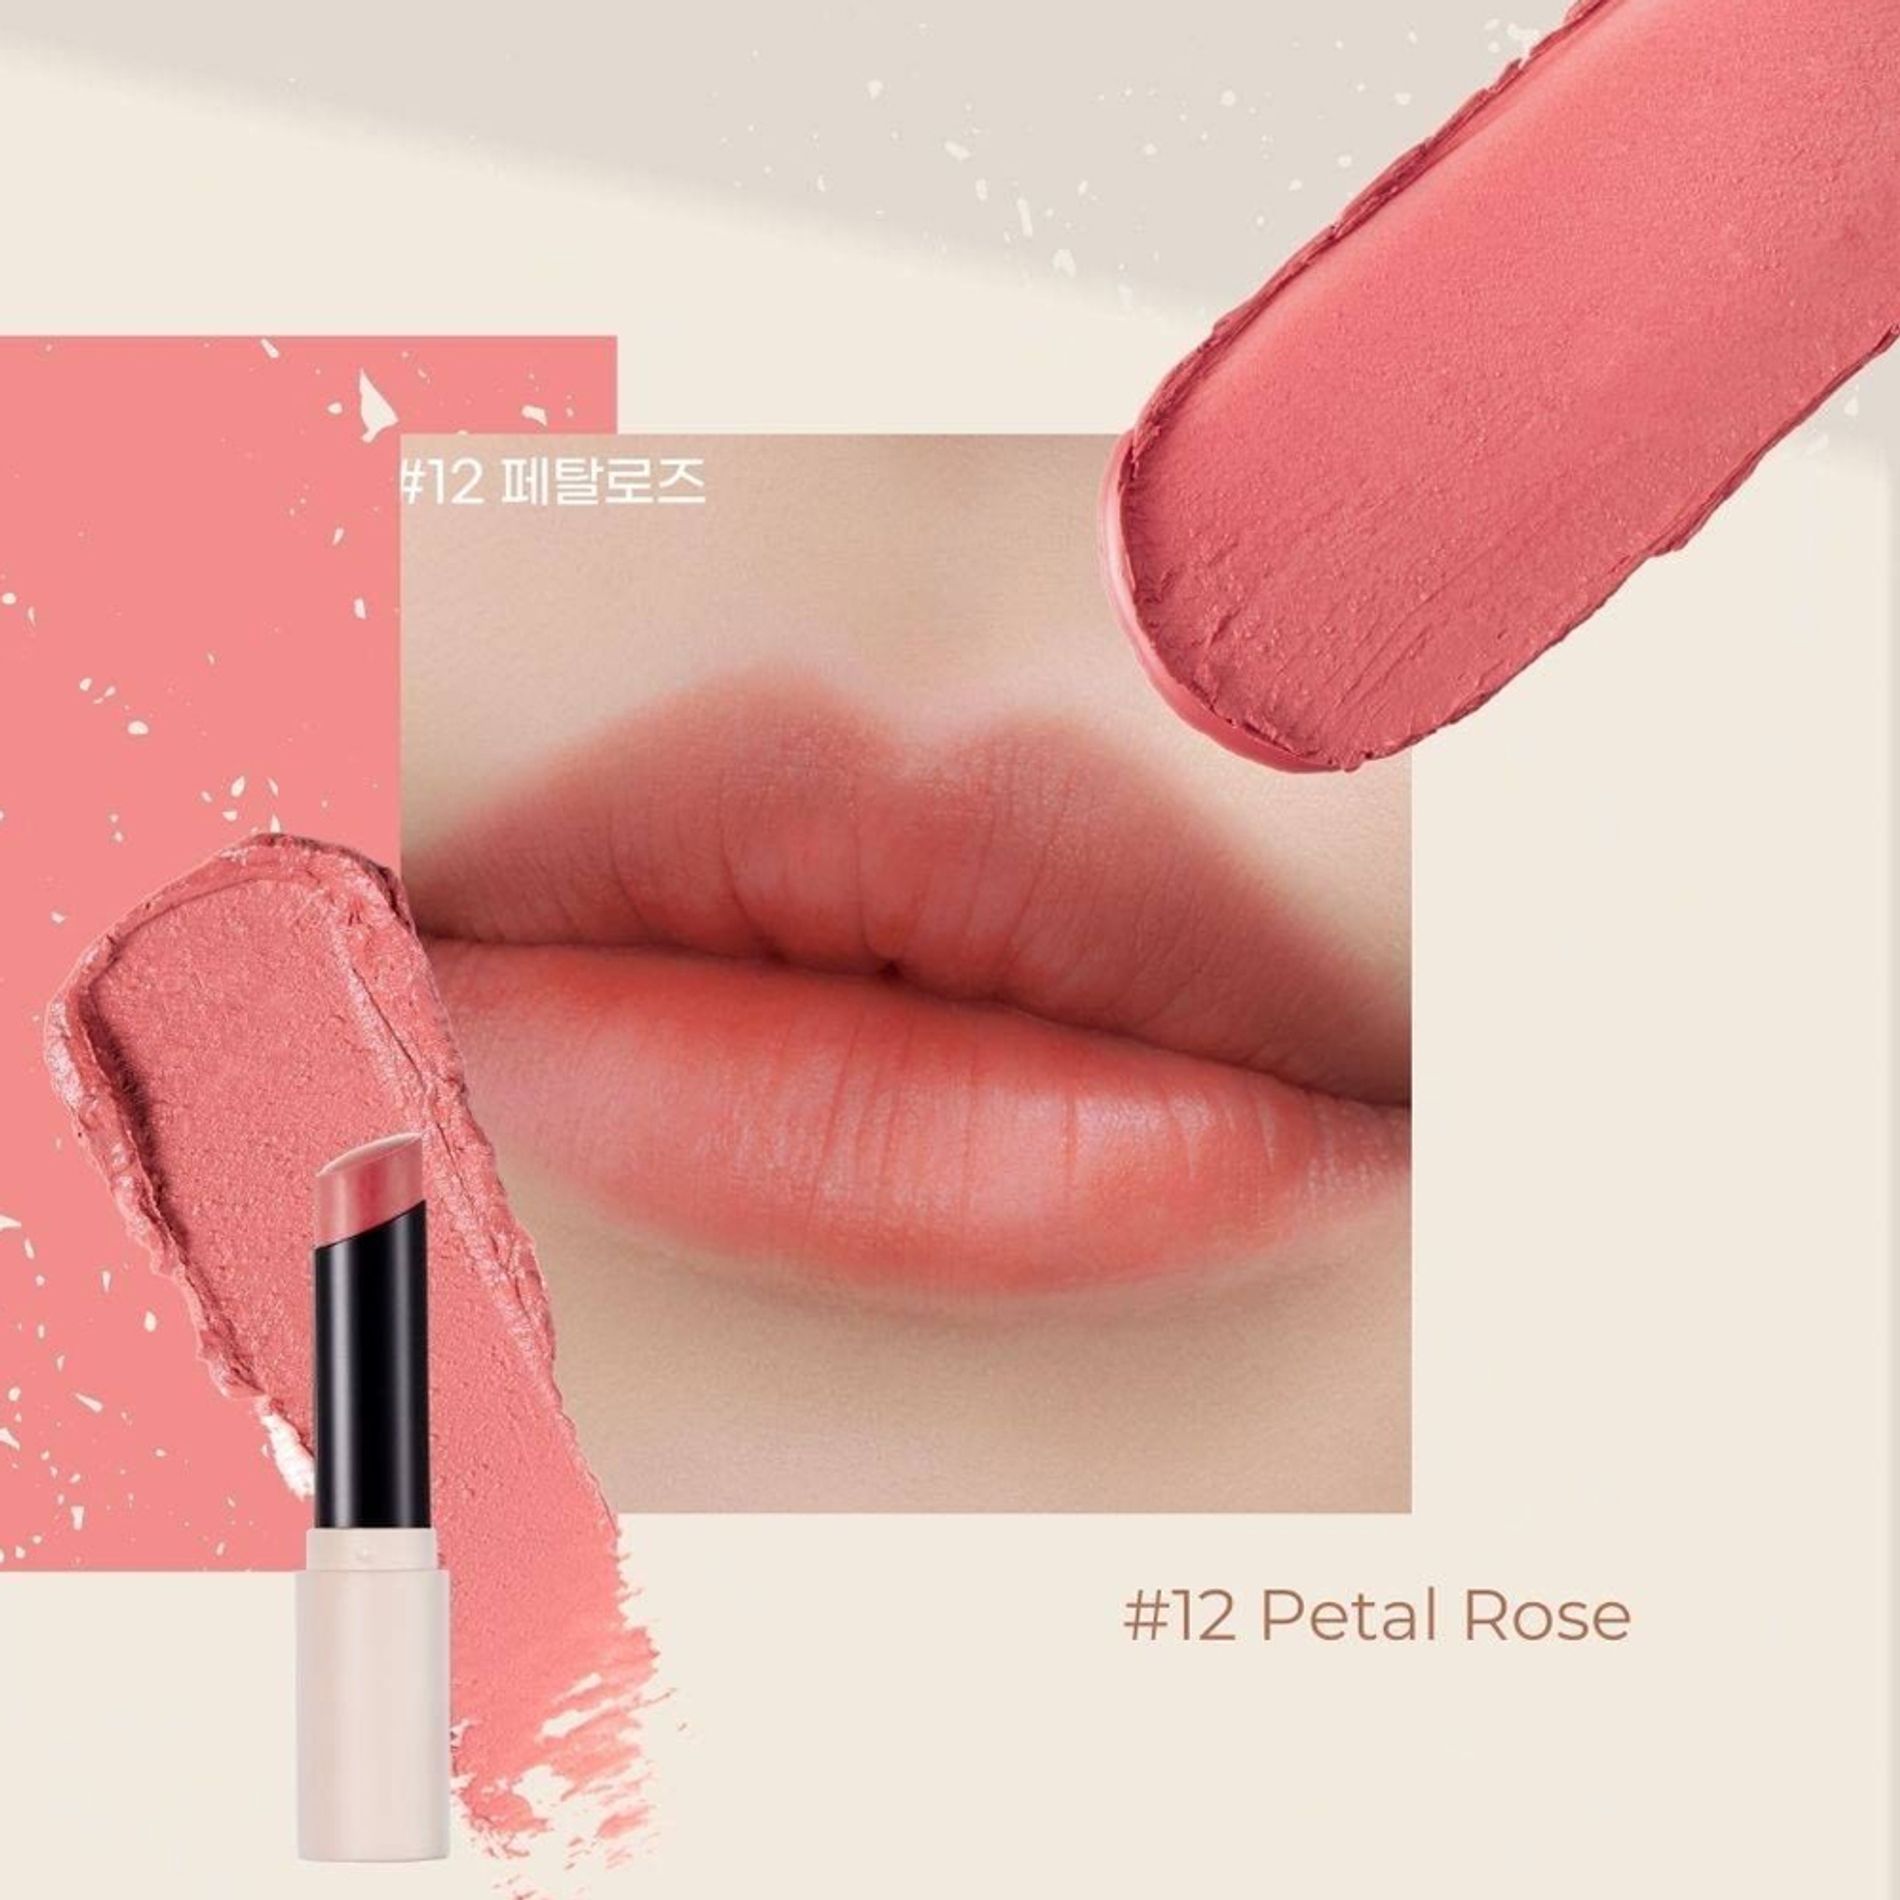 fmgt-son-thoi-li-min-fmgt-thefaceshop-rosy-nude-ink-sheer-matte-lipstick-9